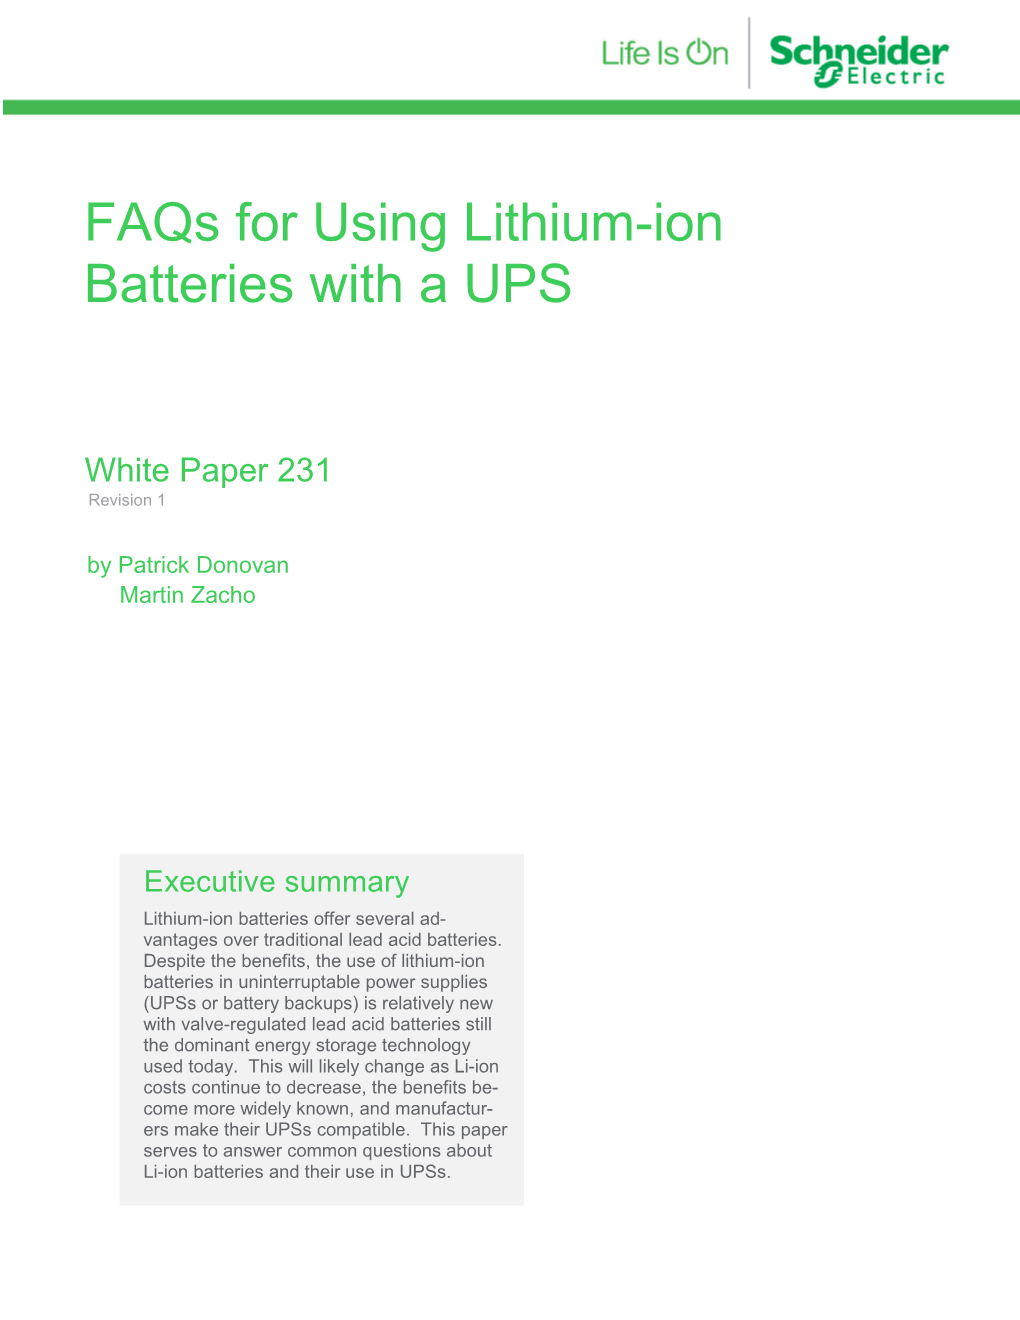 Faqs for Using Lithium-Ion Batteries with a UPS